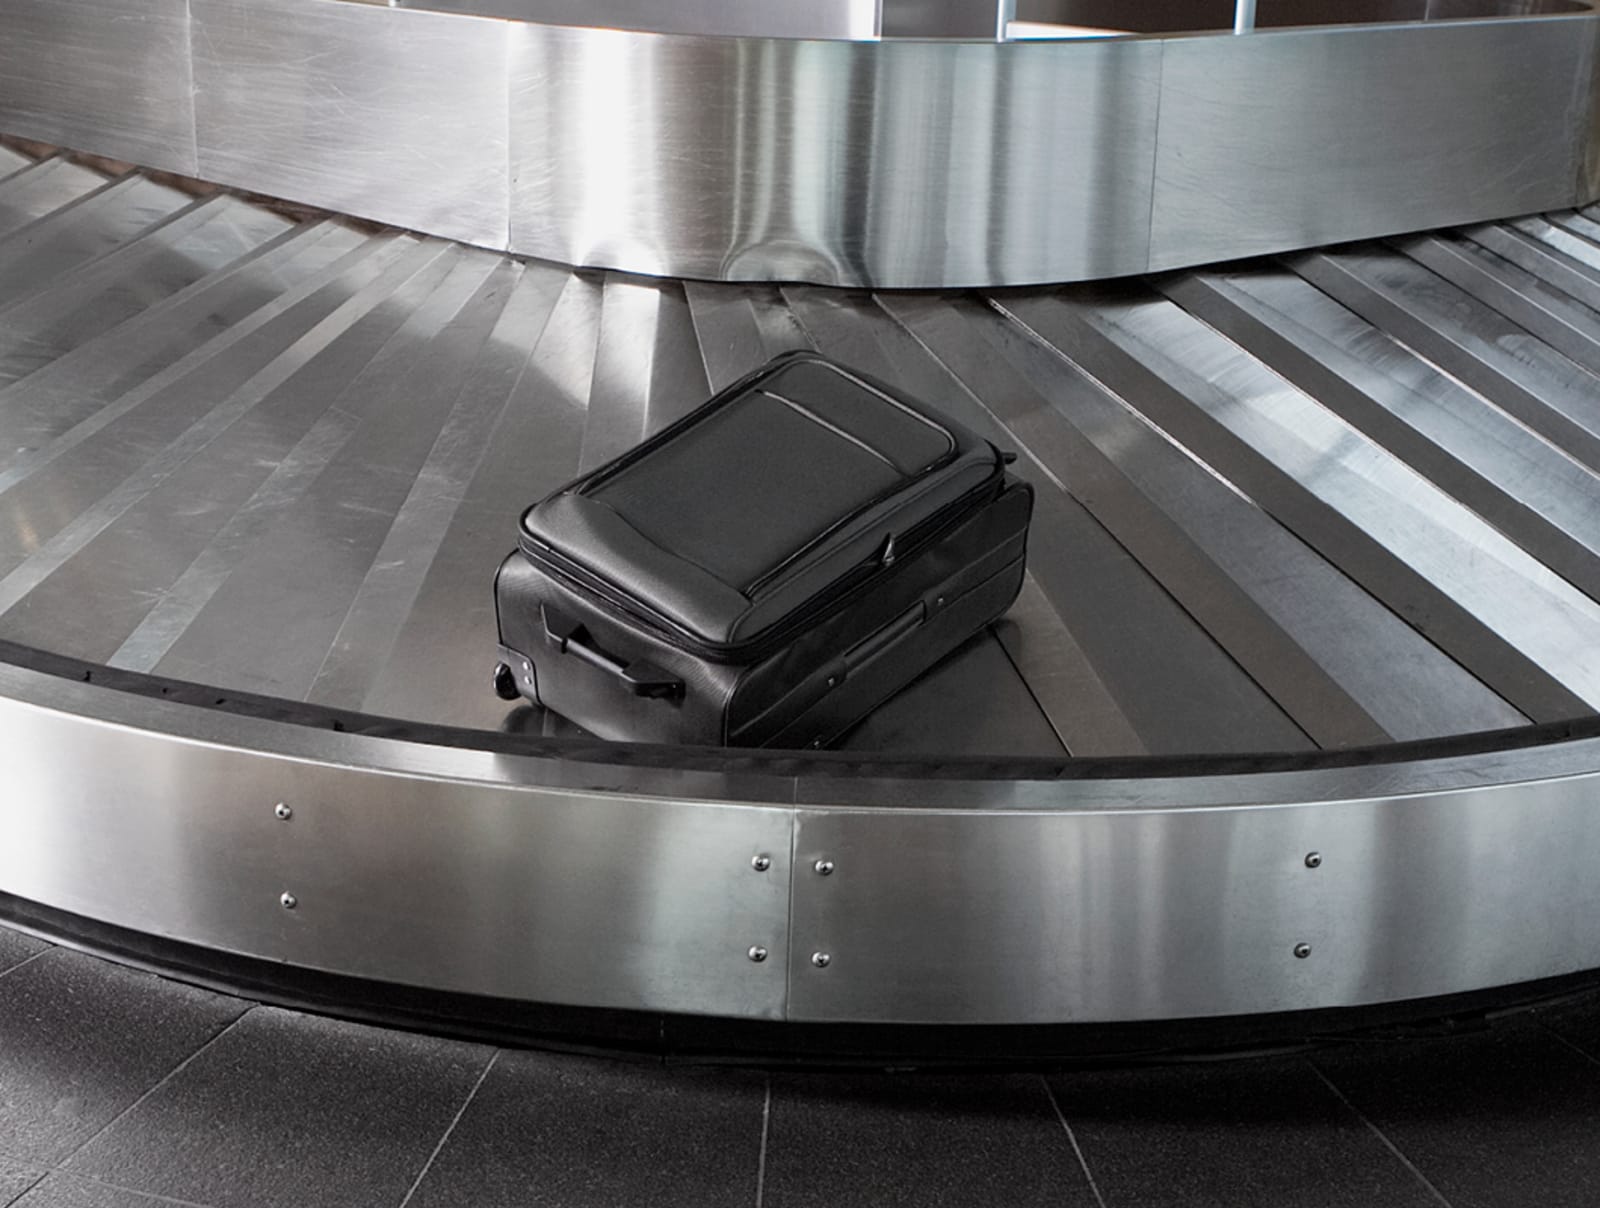 Black luggage bag sitting alone and unattended on a baggage carousel at the airport